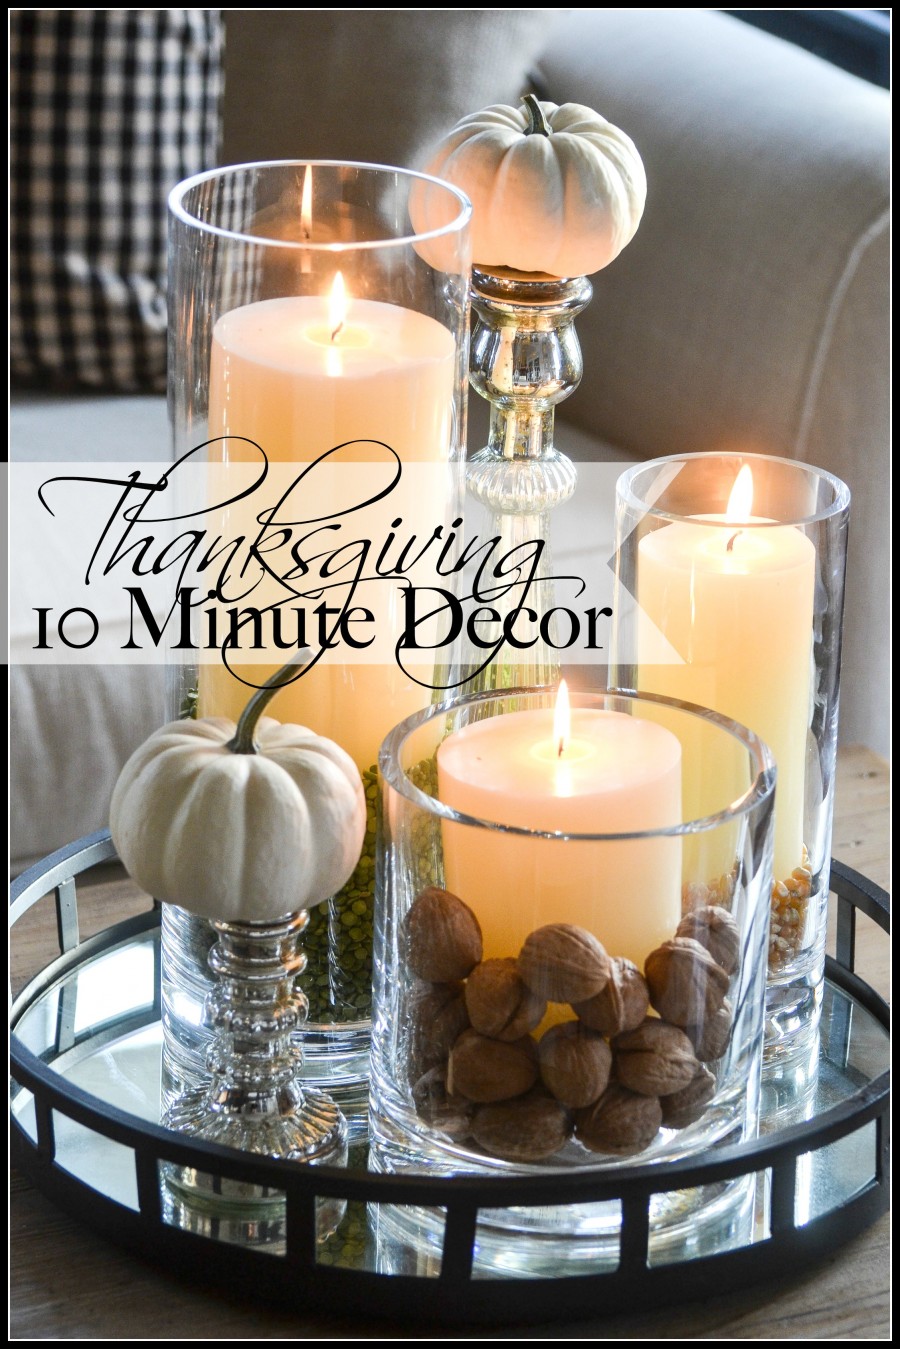 THANKSGIVING 10 MINUTE DECORATING